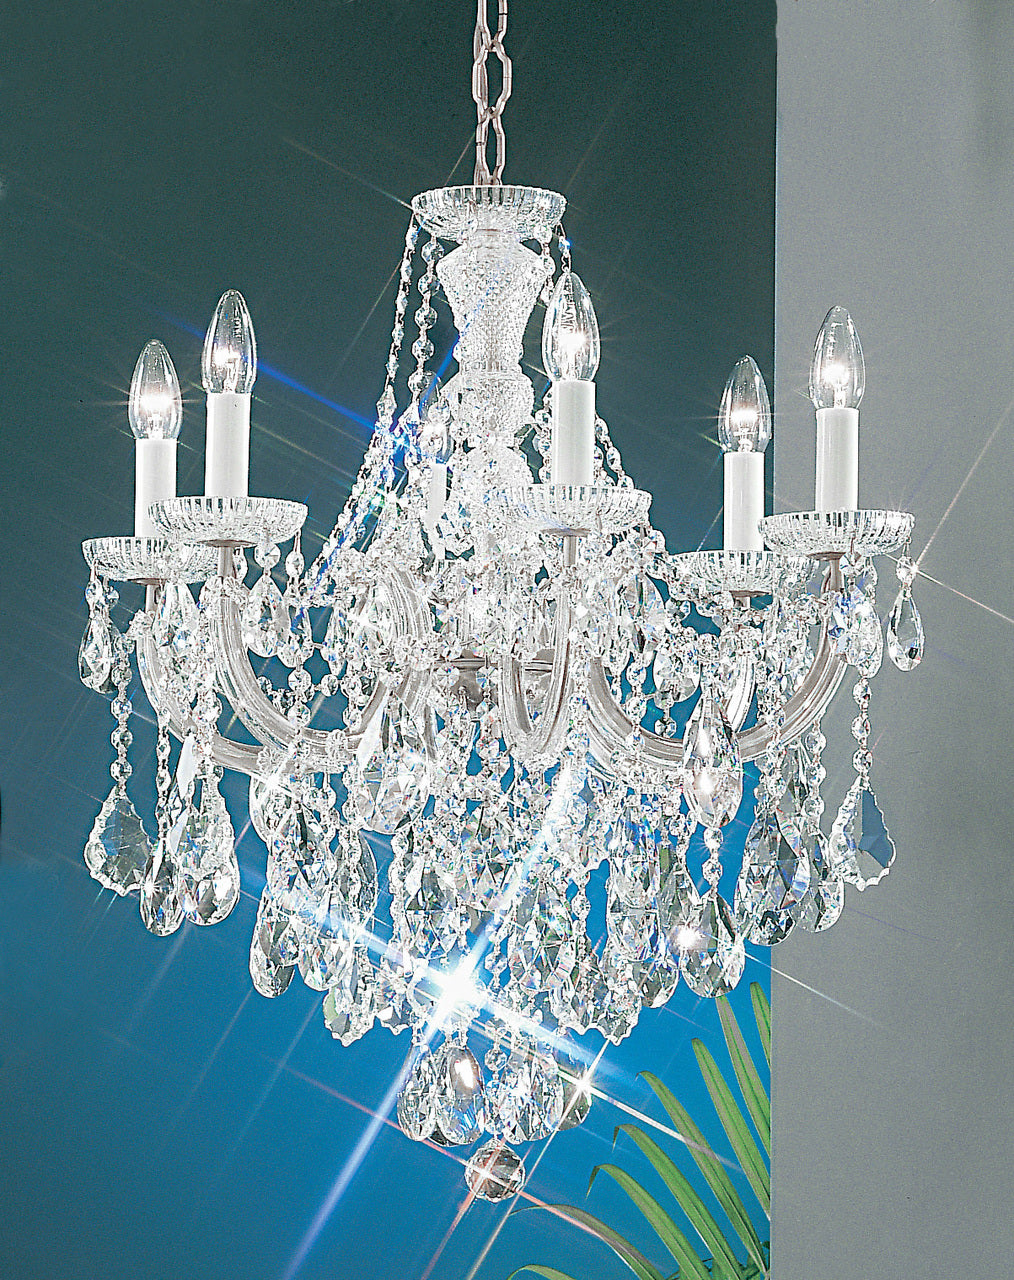 Classic Lighting 8121 CH SC Maria Theresa Traditional Crystal Chandelier in Chrome (Imported from Italy)